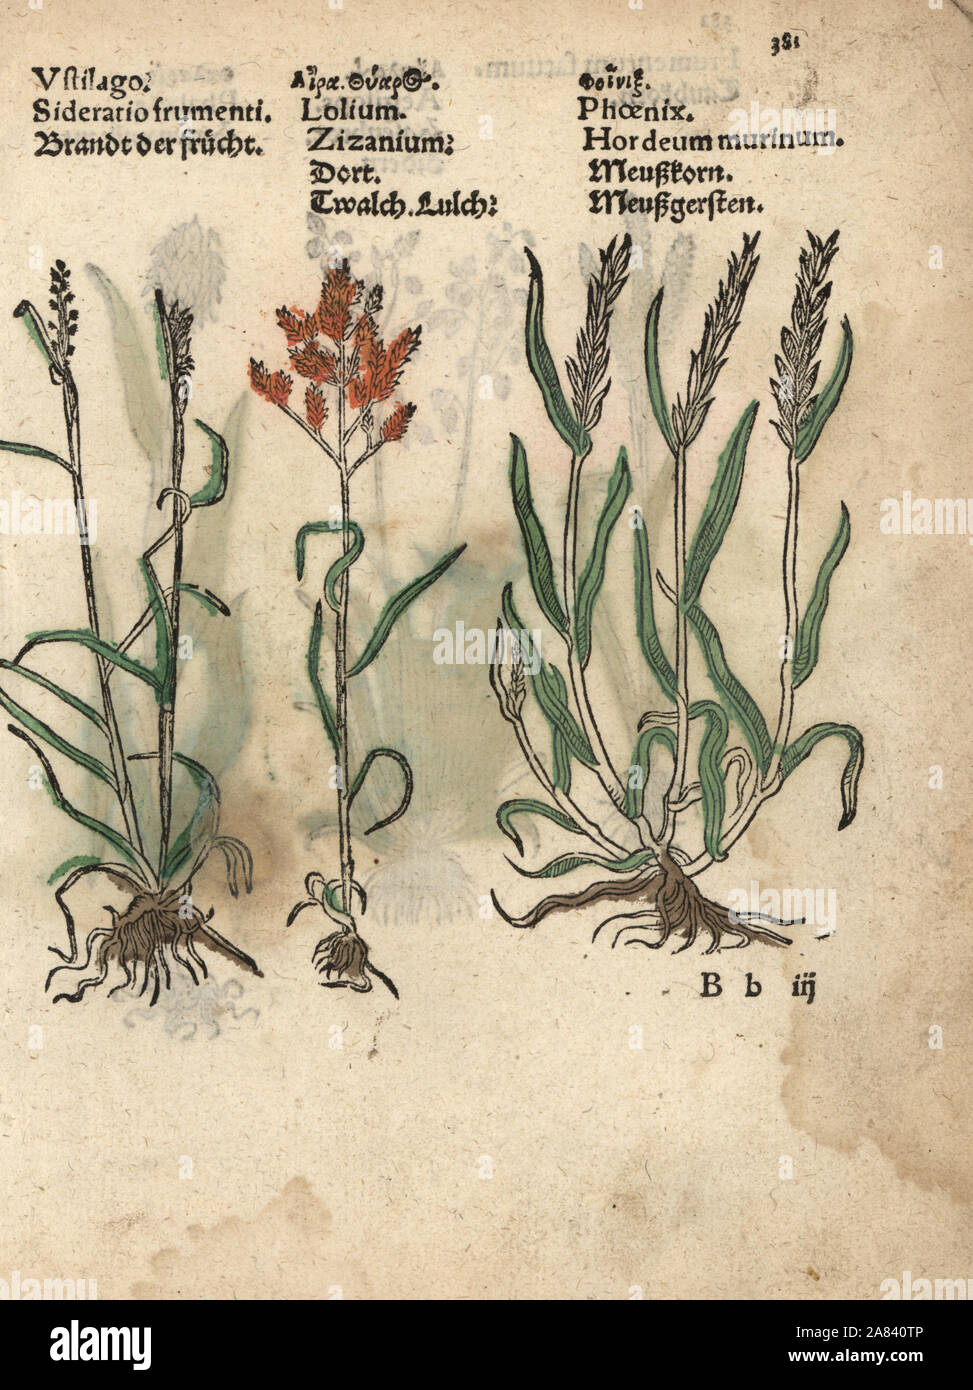 Grain variety, Ustilago, darnel, Lolium temulentum, and wall barley, Hordeum murinum. Handcoloured woodblock engraving of a botanical illustration from Adam Lonicer's Krauterbuch, or Herbal, Frankfurt, 1557. This from a 17th century pirate edition or atlas of illustrations only, with captions in Latin, Greek, French, Italian, German, and in English manuscript. Stock Photo